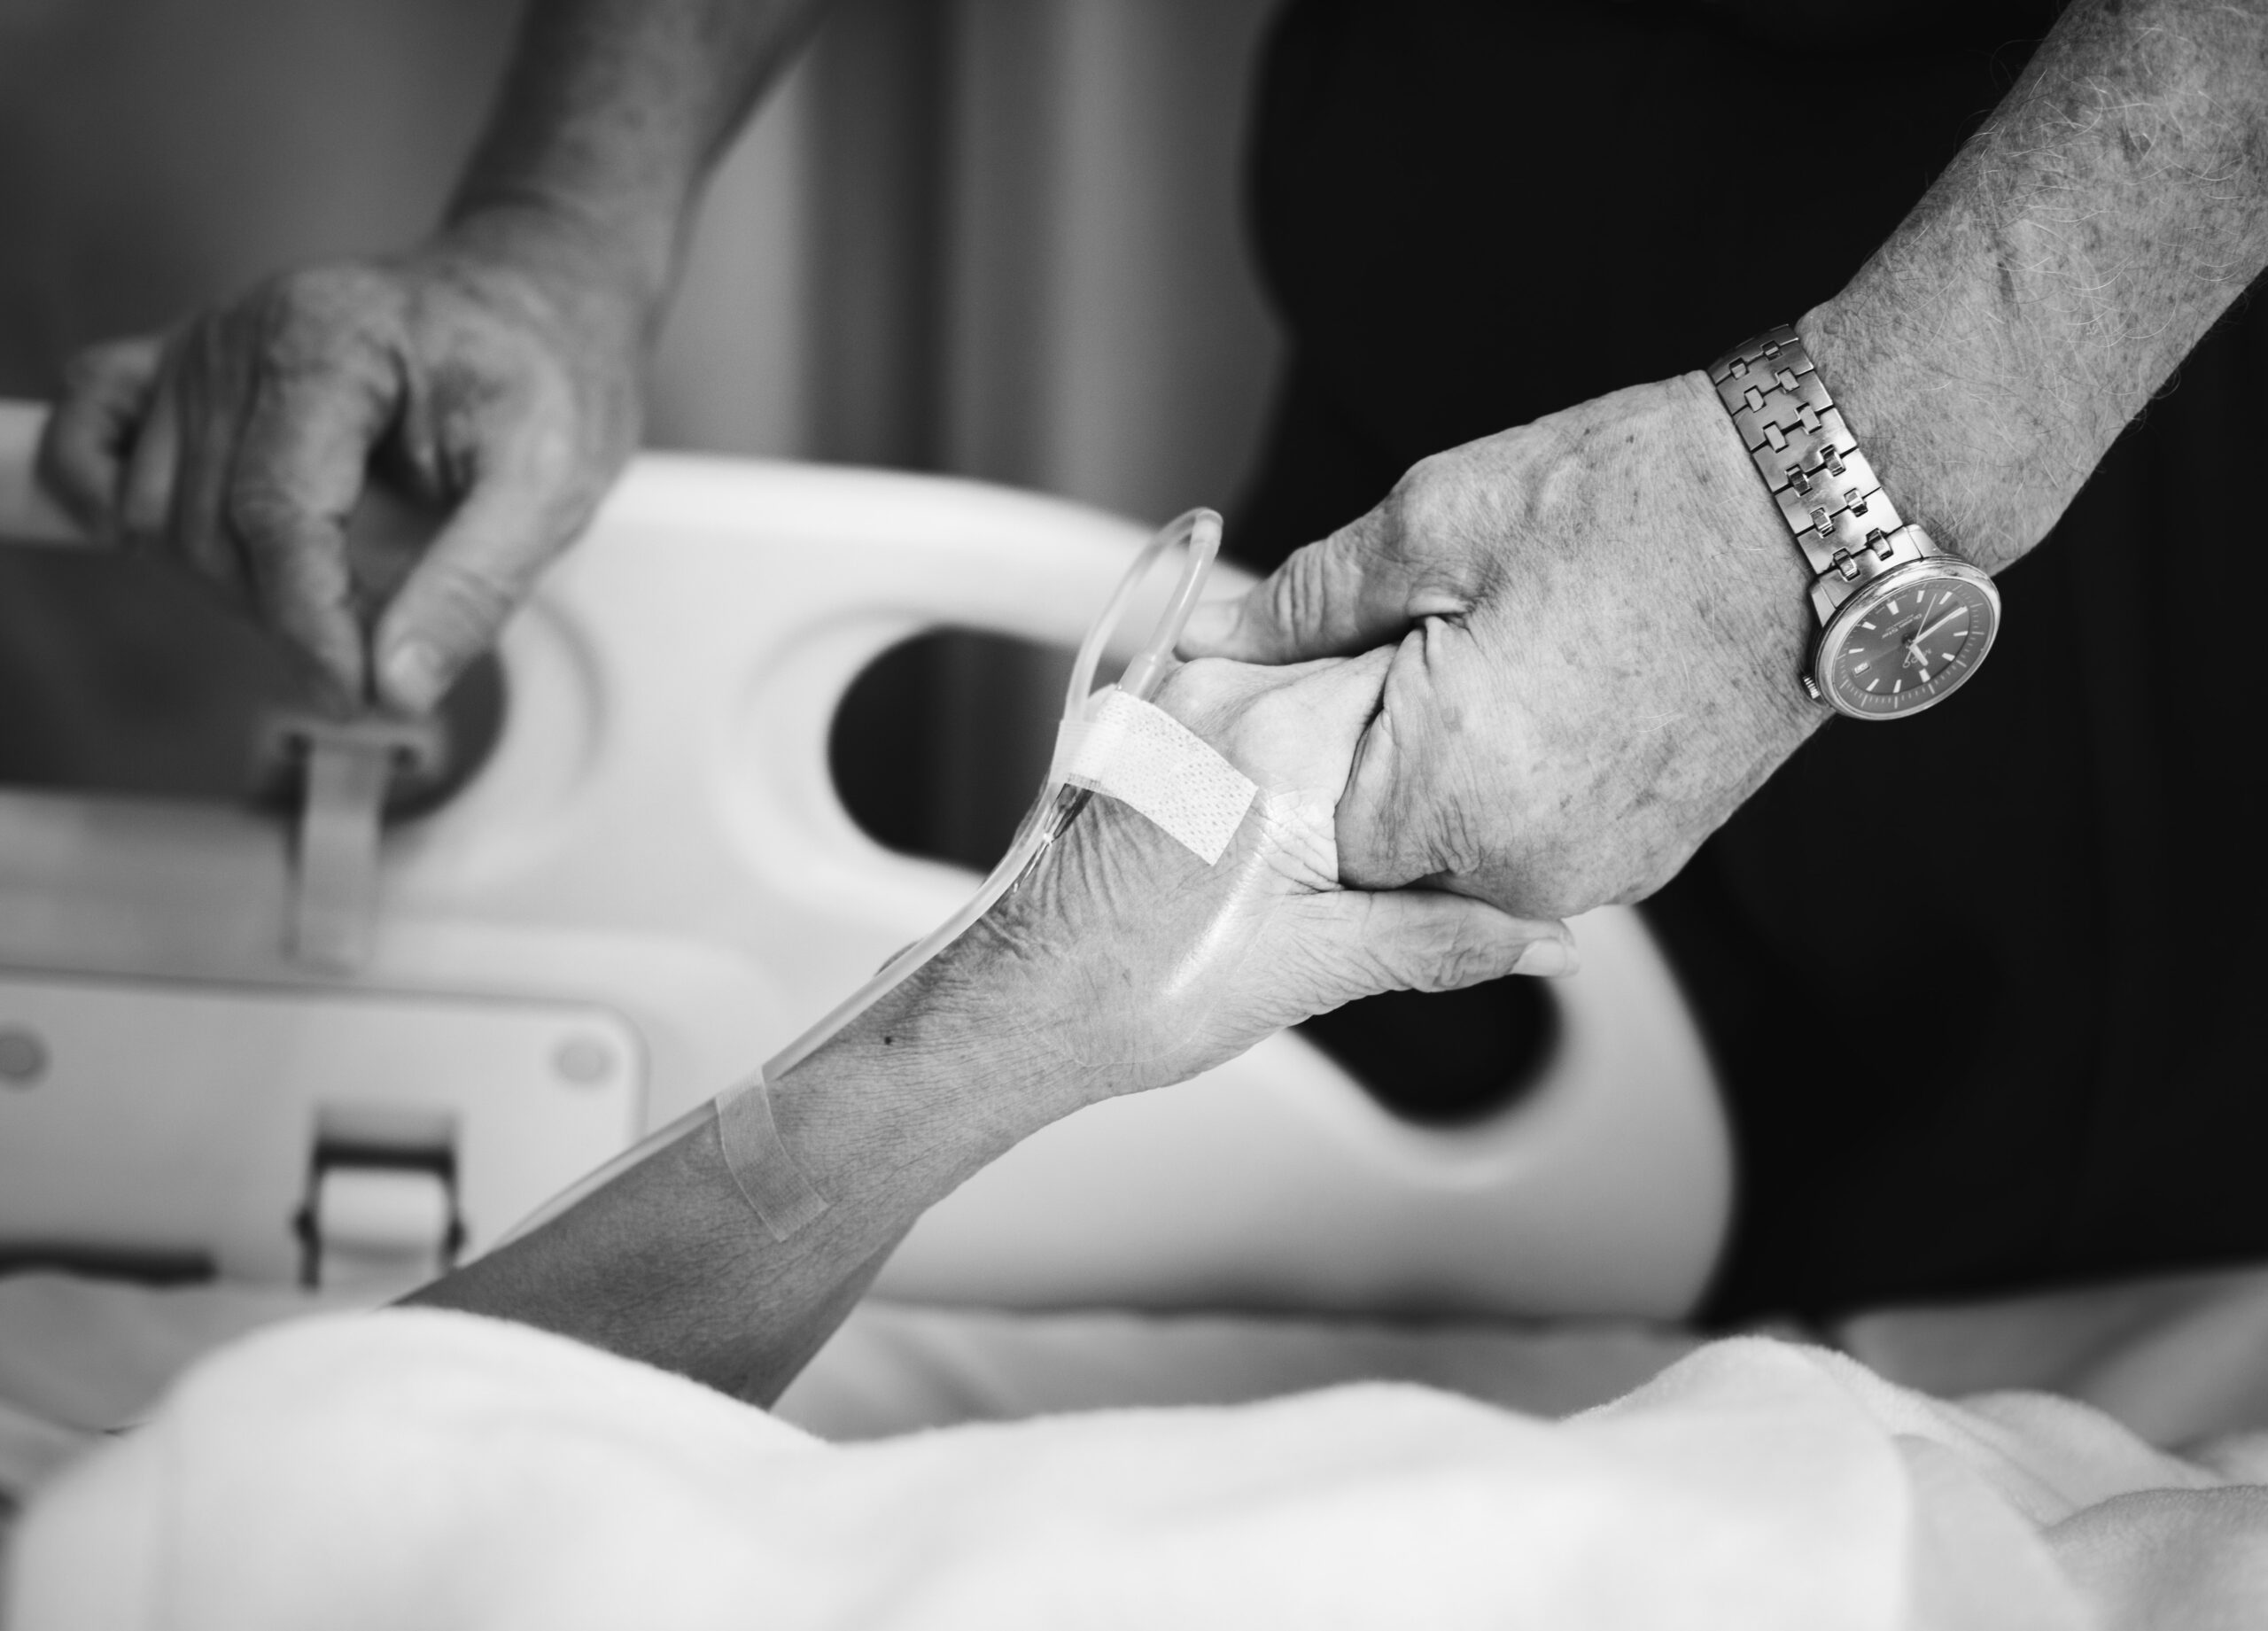 older person in a hospital bed holds someone's hand